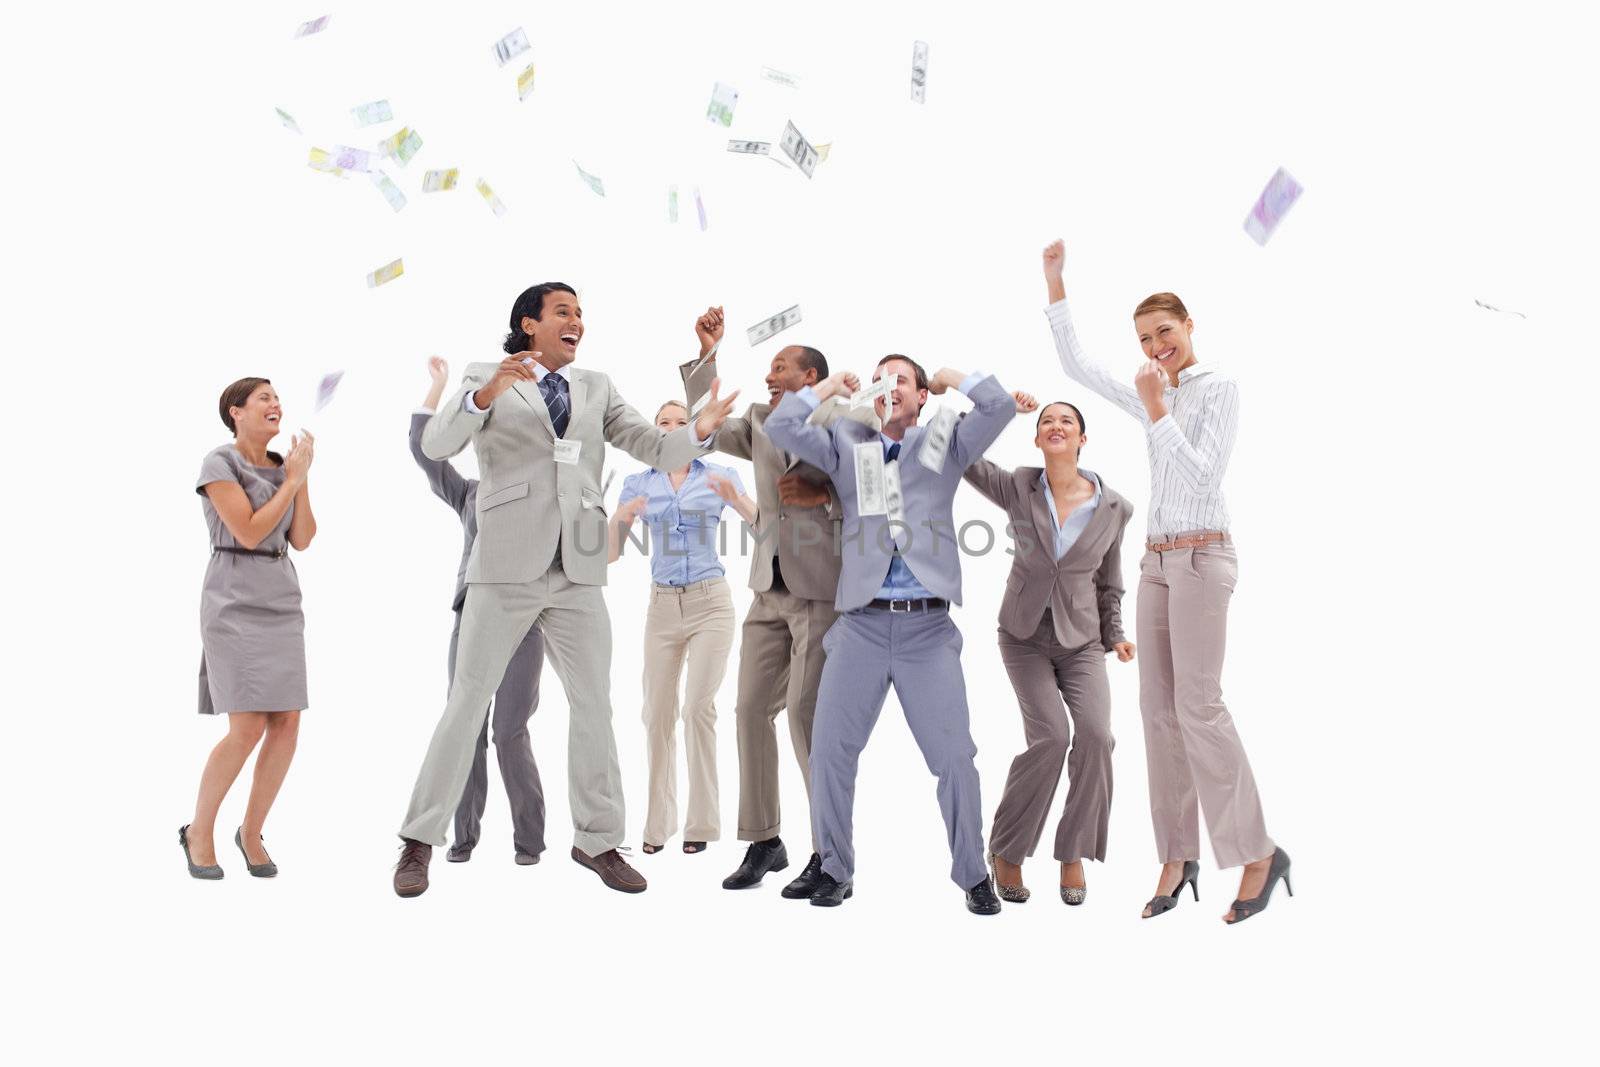 Very enthusiast people jumping and raising their arms with money falling from the sky against white background